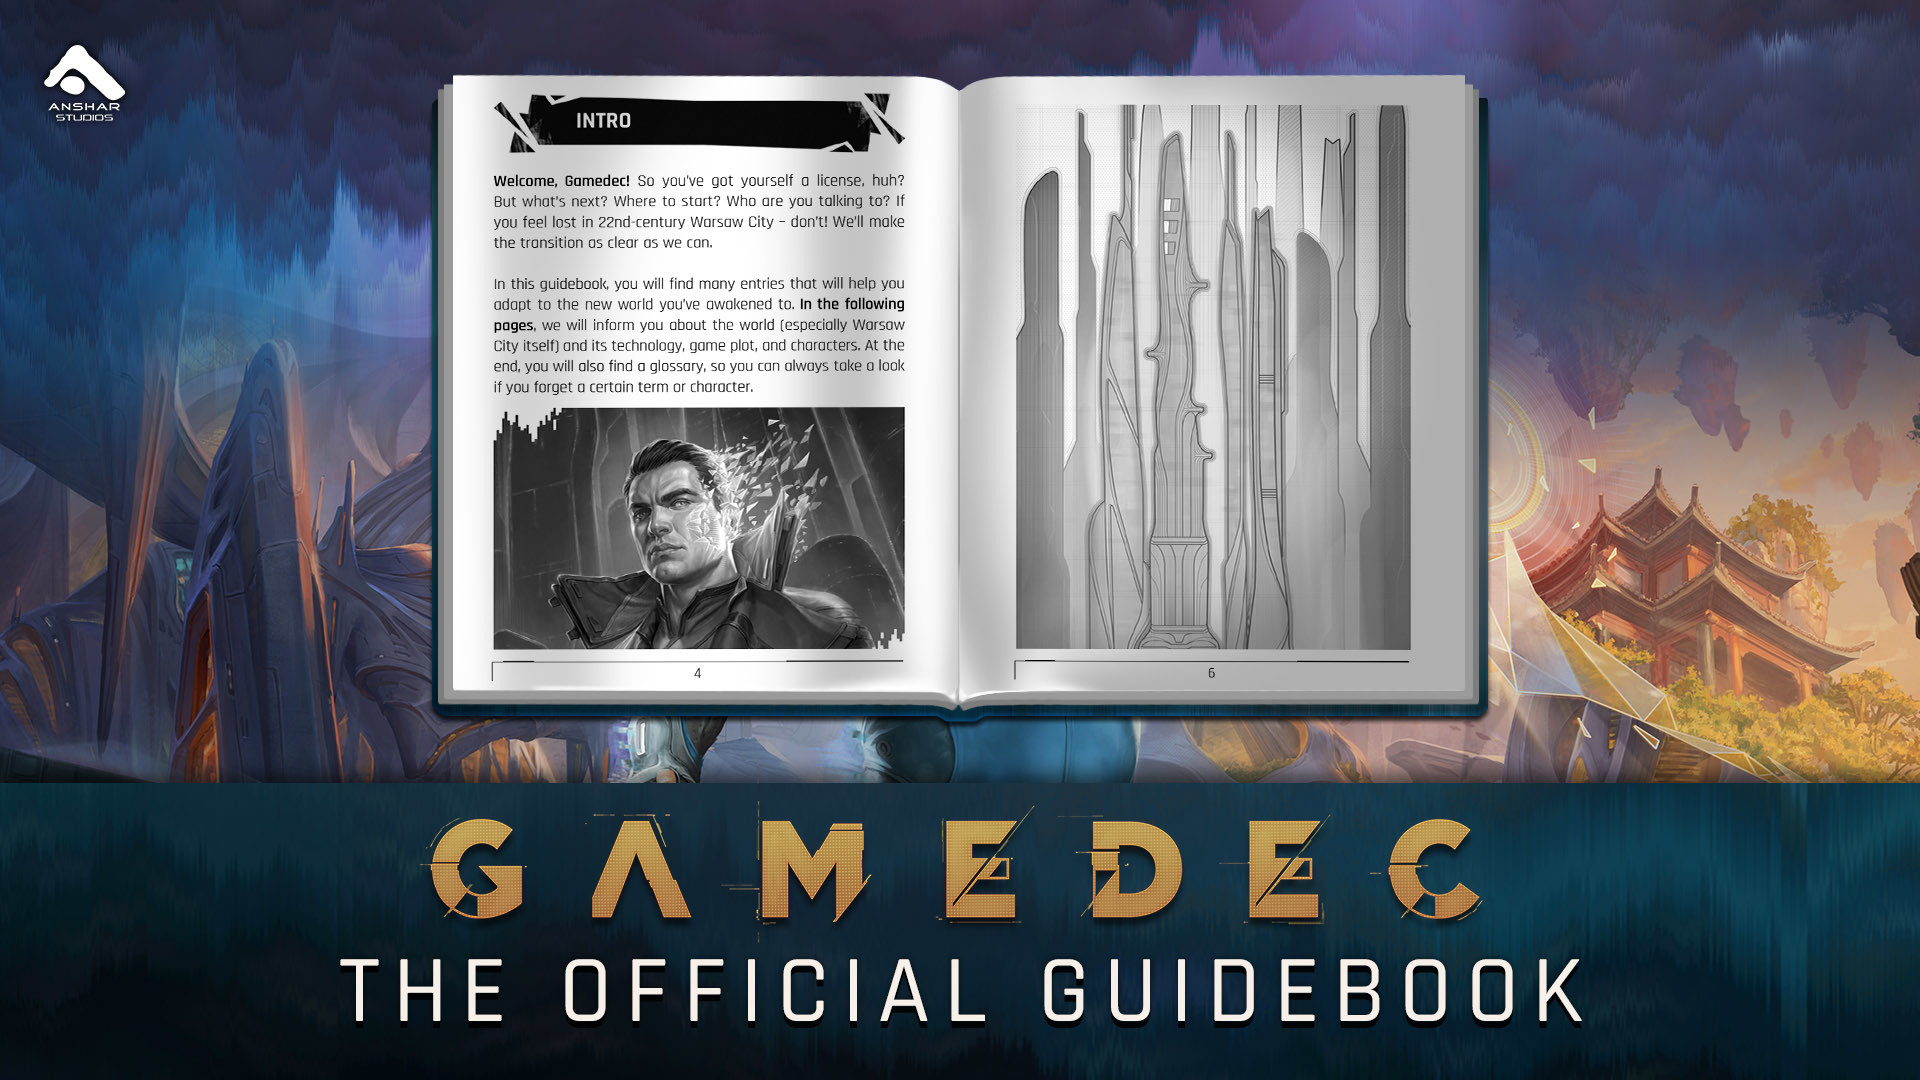 Gamedec: The Official Guidebook on Steam